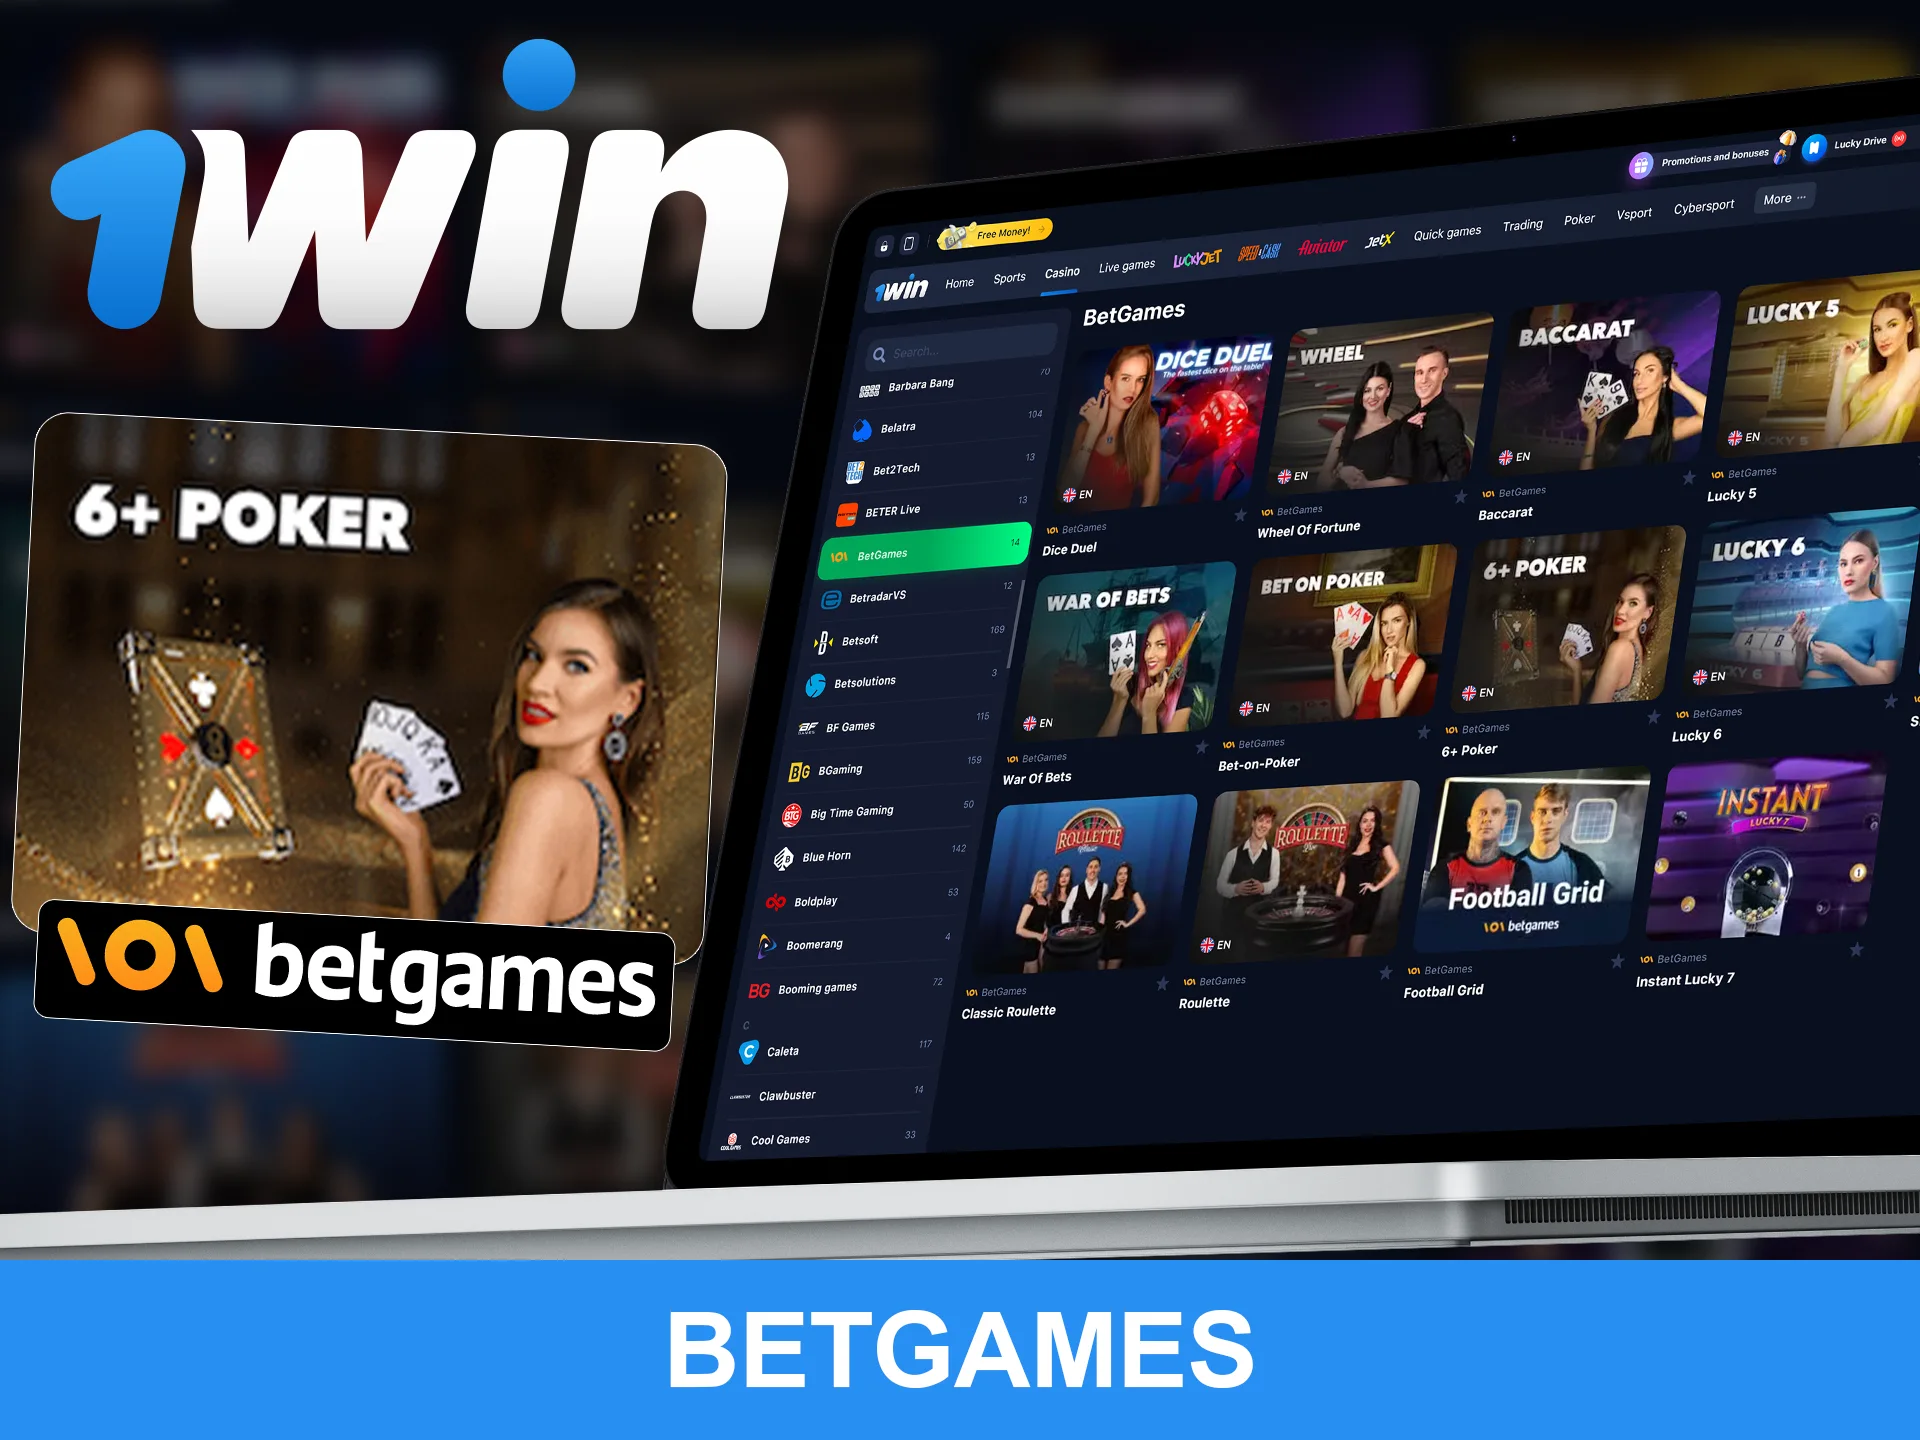 Play with live dealers in games by Betgames at 1win.